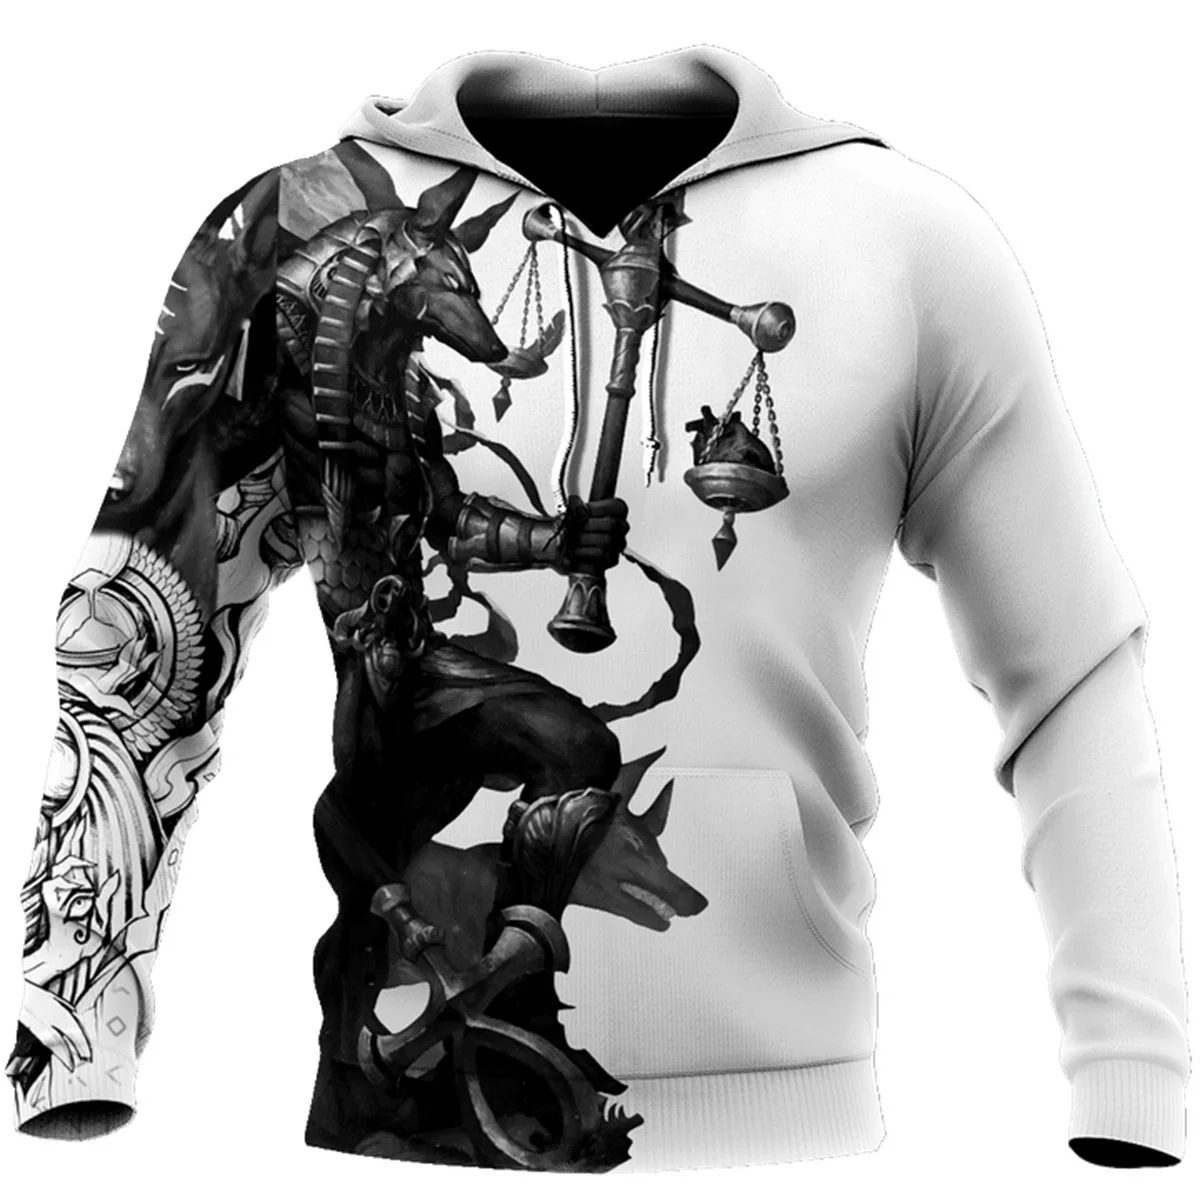 

Ancient Egypt ANUBIS AND HEART EGYPTIAN GODS 3D Unisex Hoodie Men Sweatshirt Streetwear Zip Pullover Casual Jacket Tracksuits